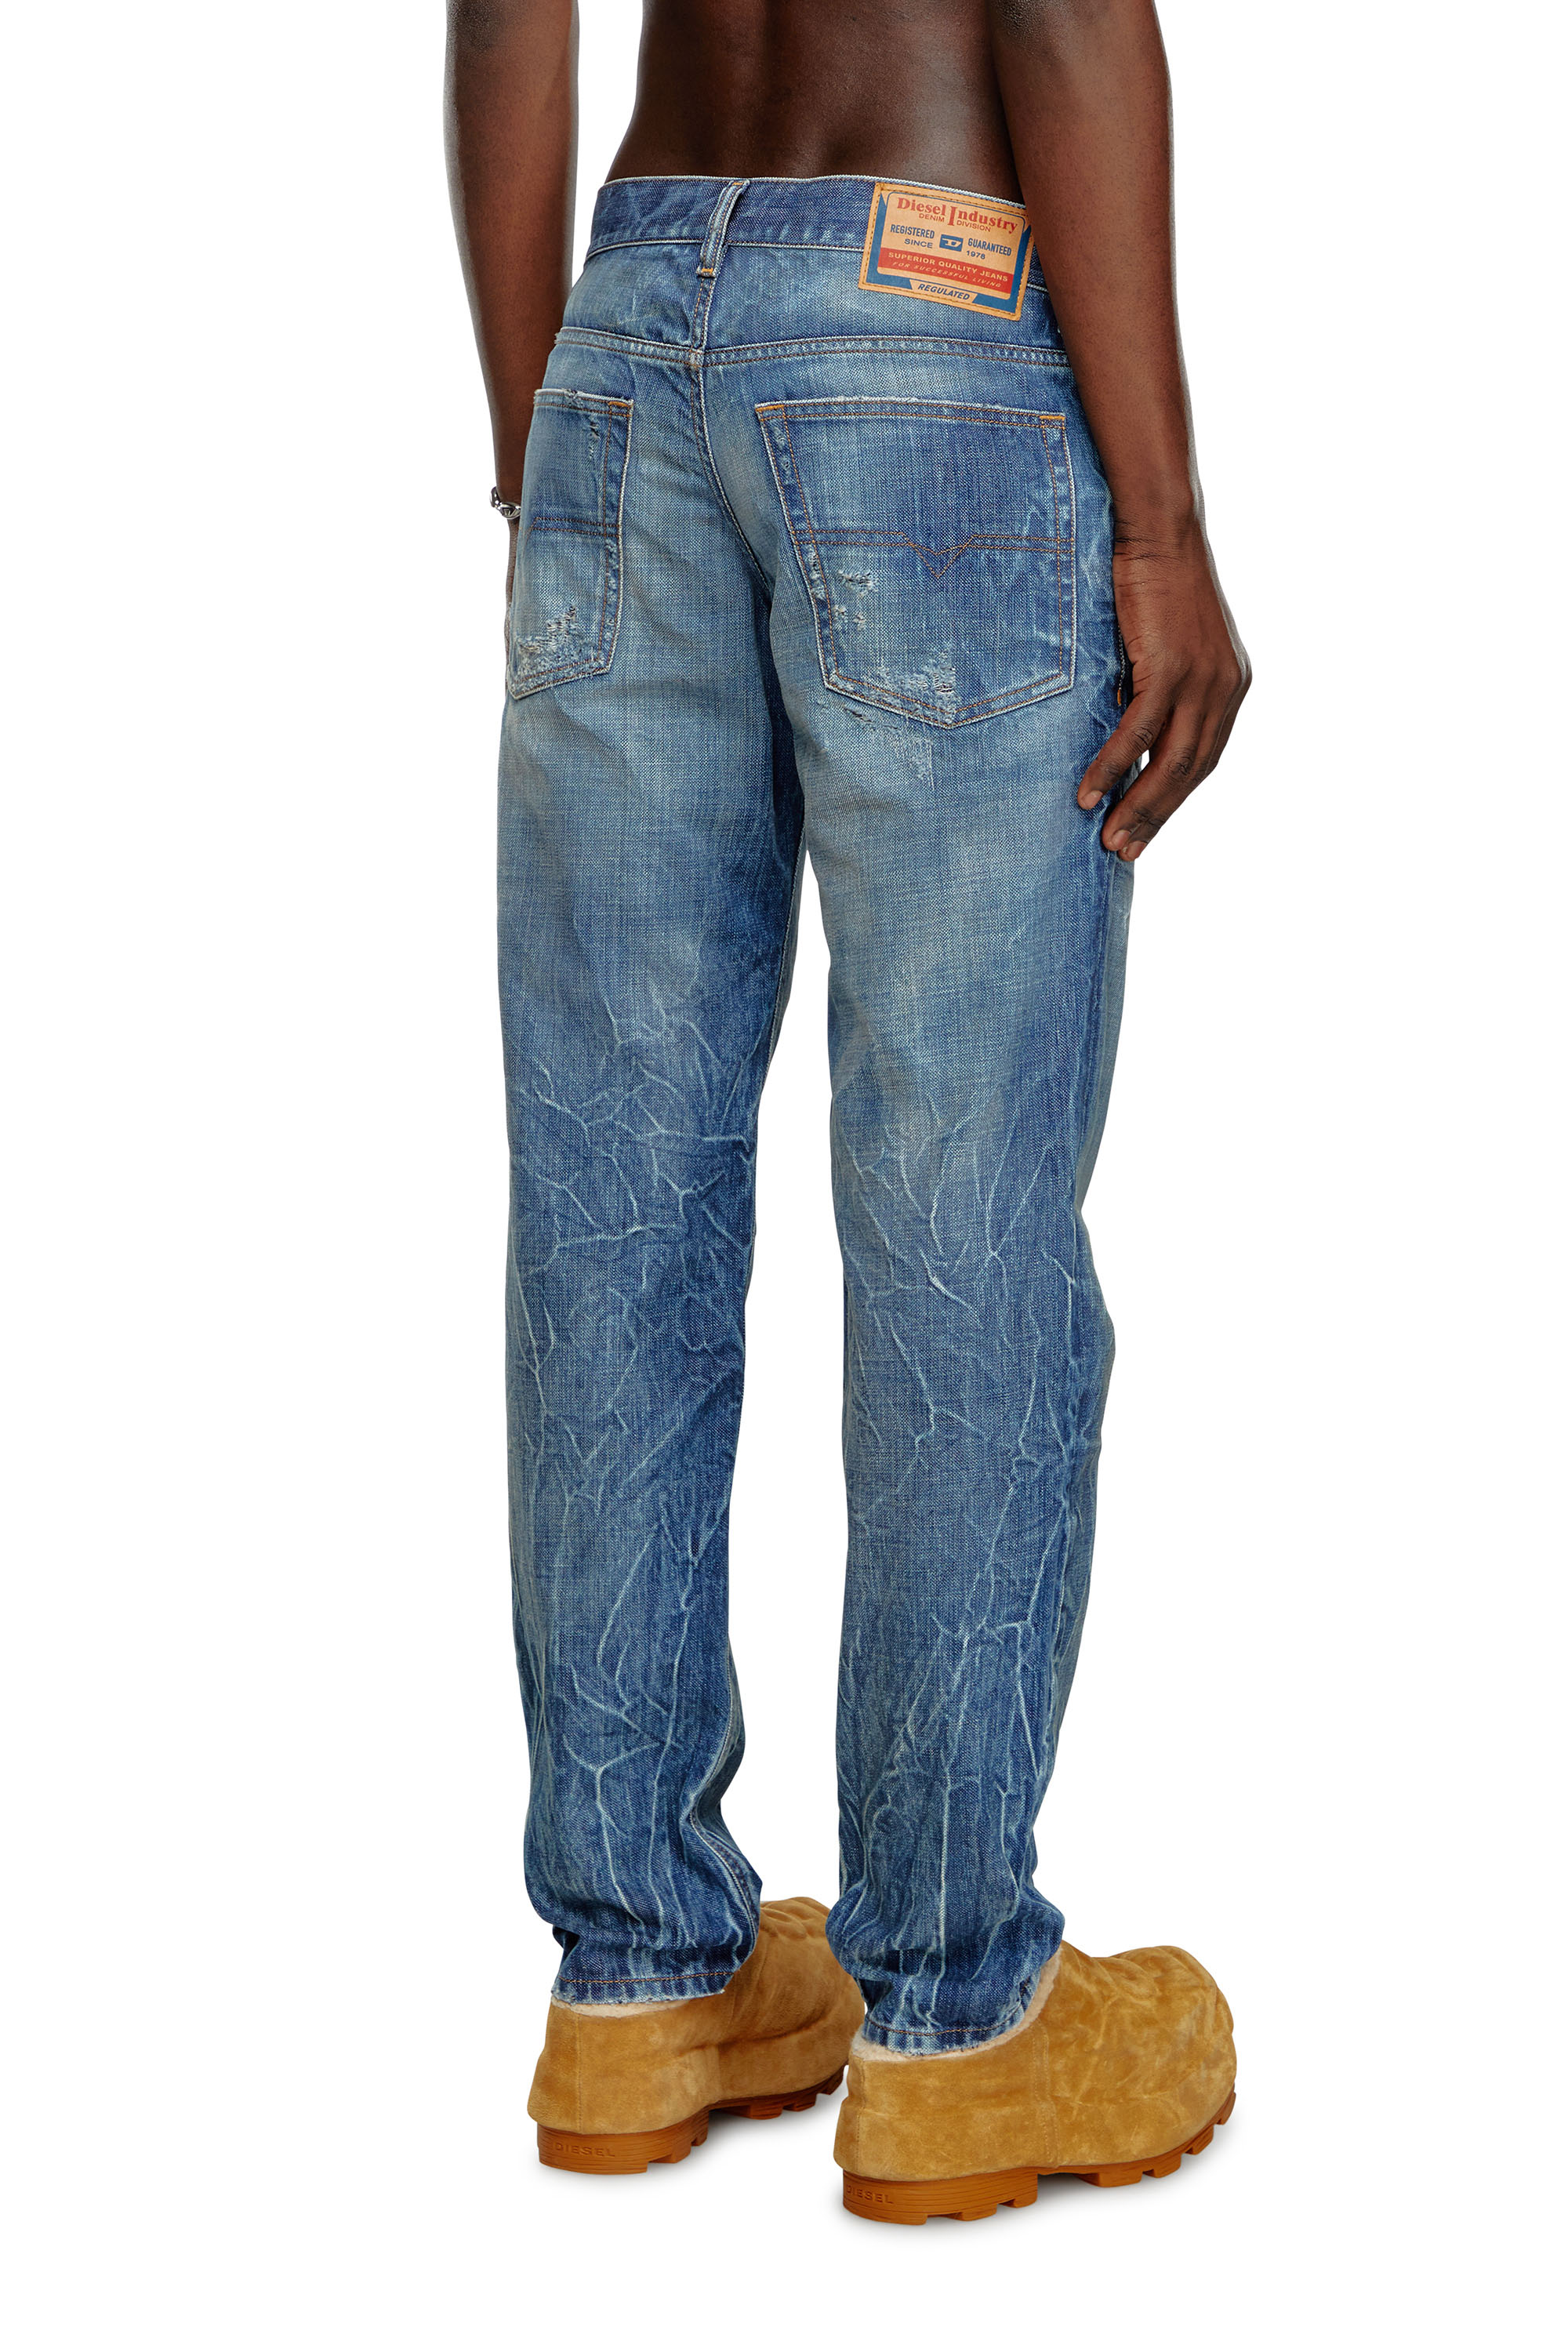 Diesel - Tapered Jeans 2023 D-Finitive 09K37, Hombre Tapered Jeans - 2023 D-Finitive in Azul marino - Image 4